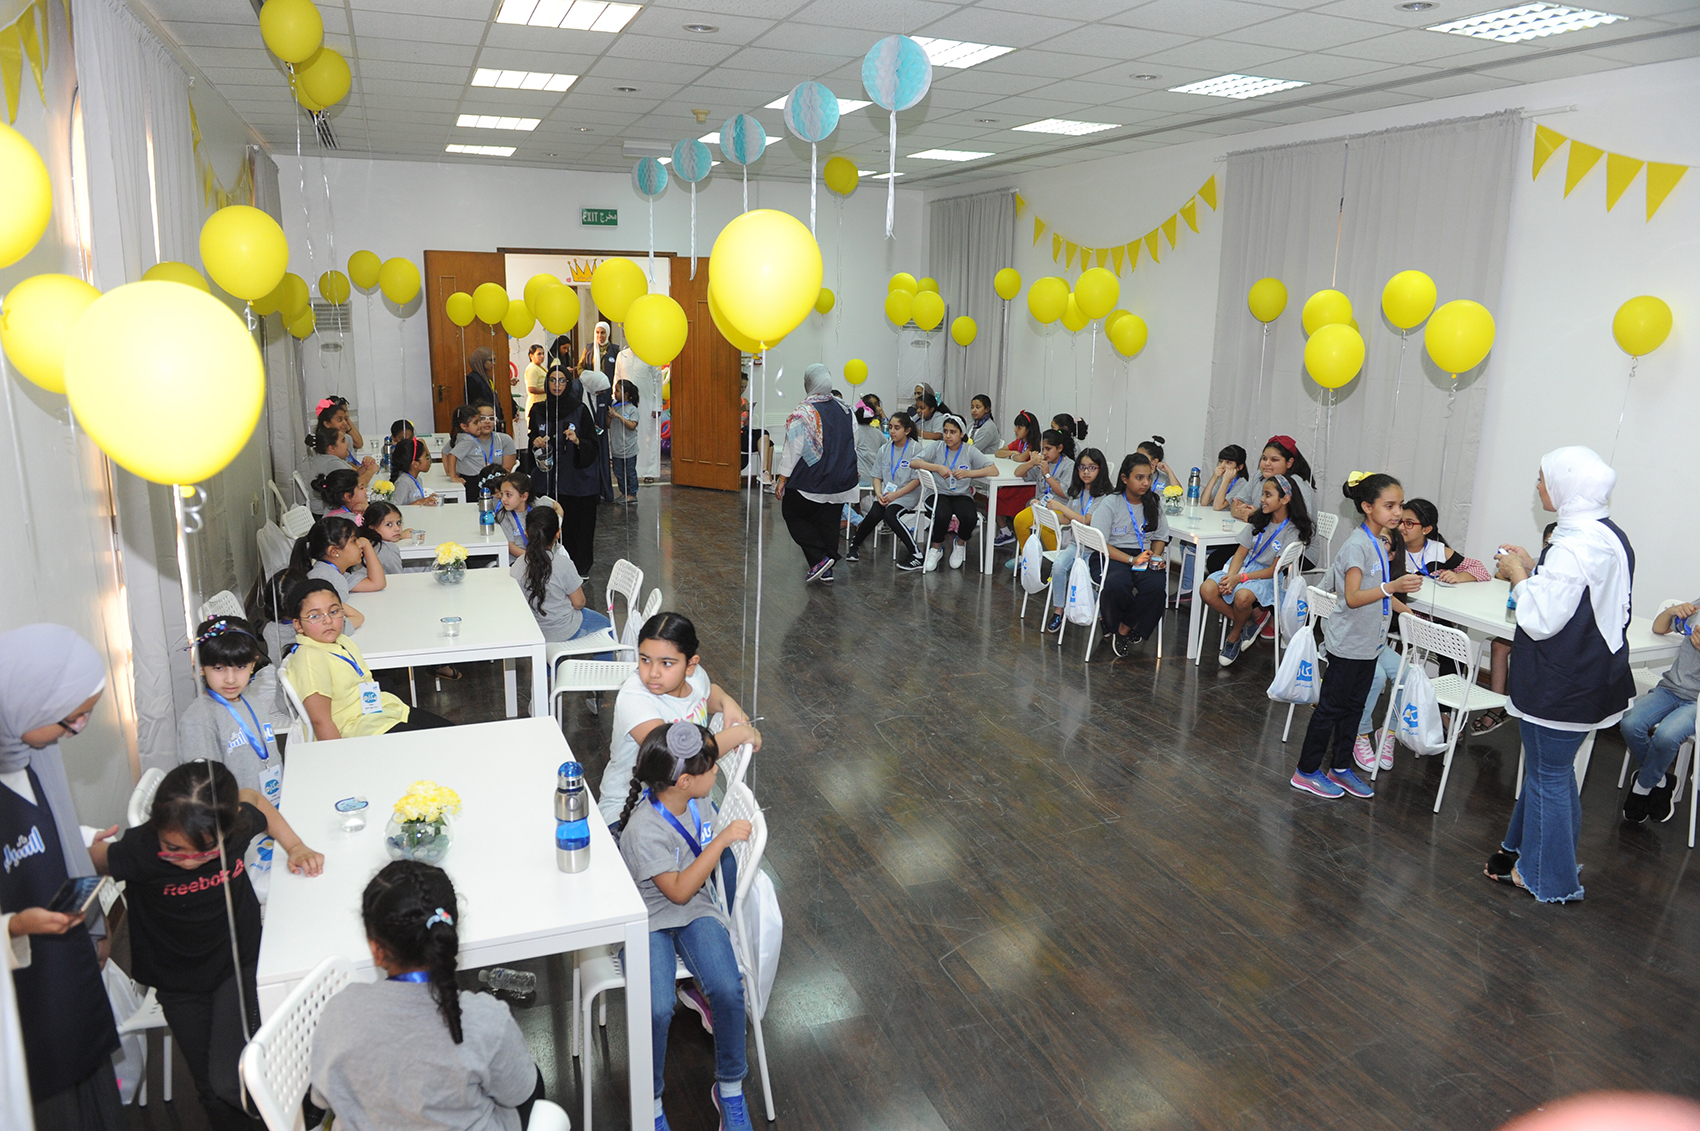 Youth authority launches "Makarem" education club